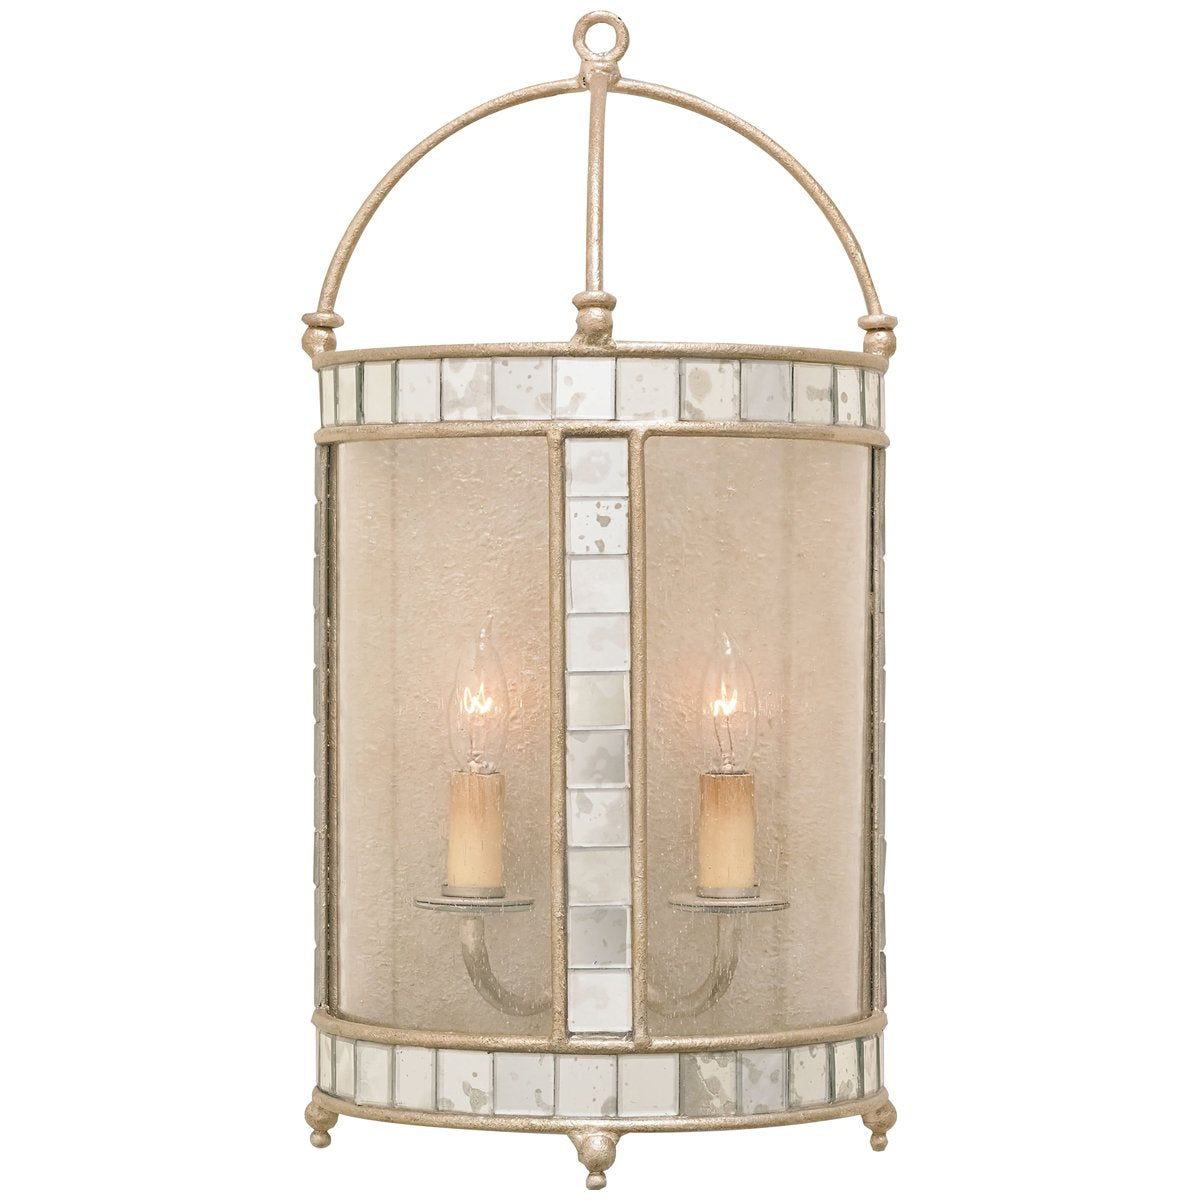 Currey and Company Corsica Wall Sconce